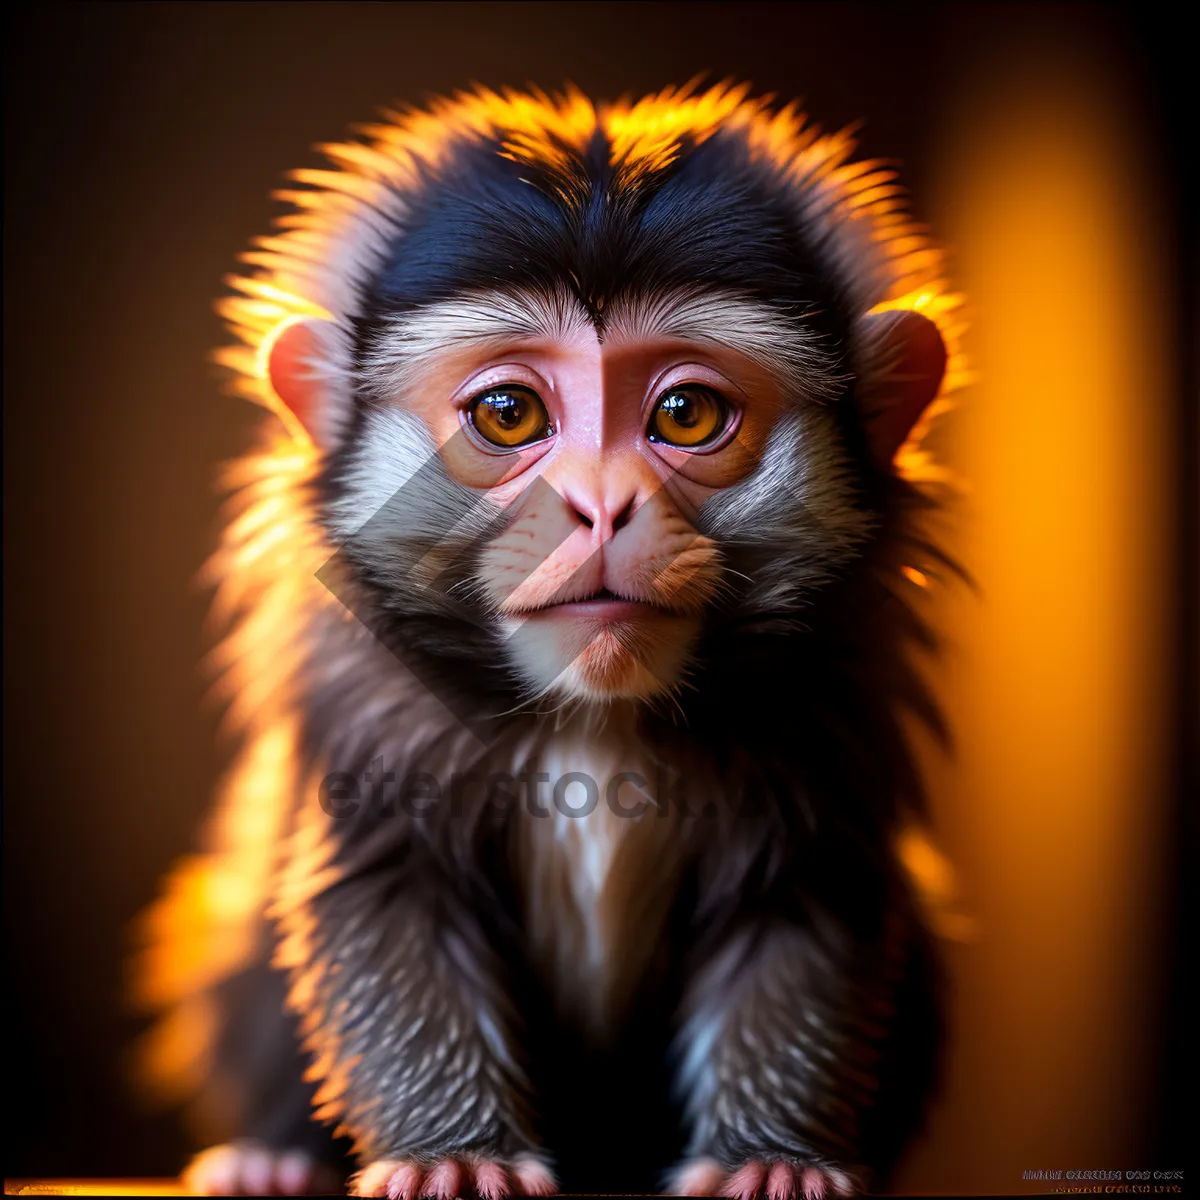 Picture of Adorable Primate With Expressive Eyes